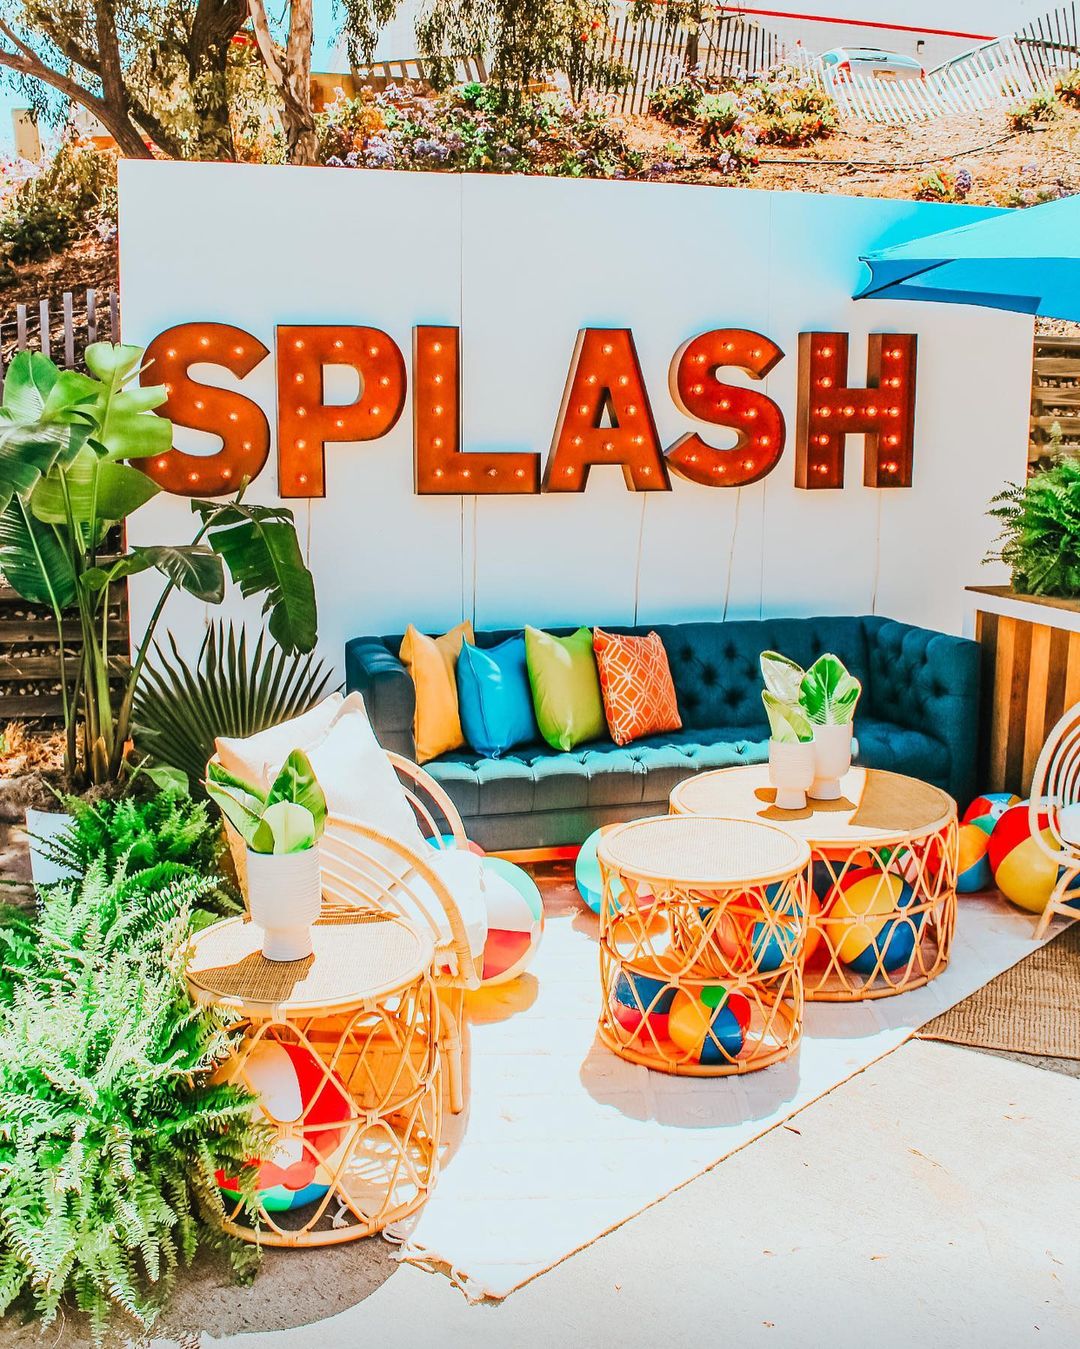 Backyard Party Decorations for a Pool Party. Photo by Instagram user @pacificeventproductions